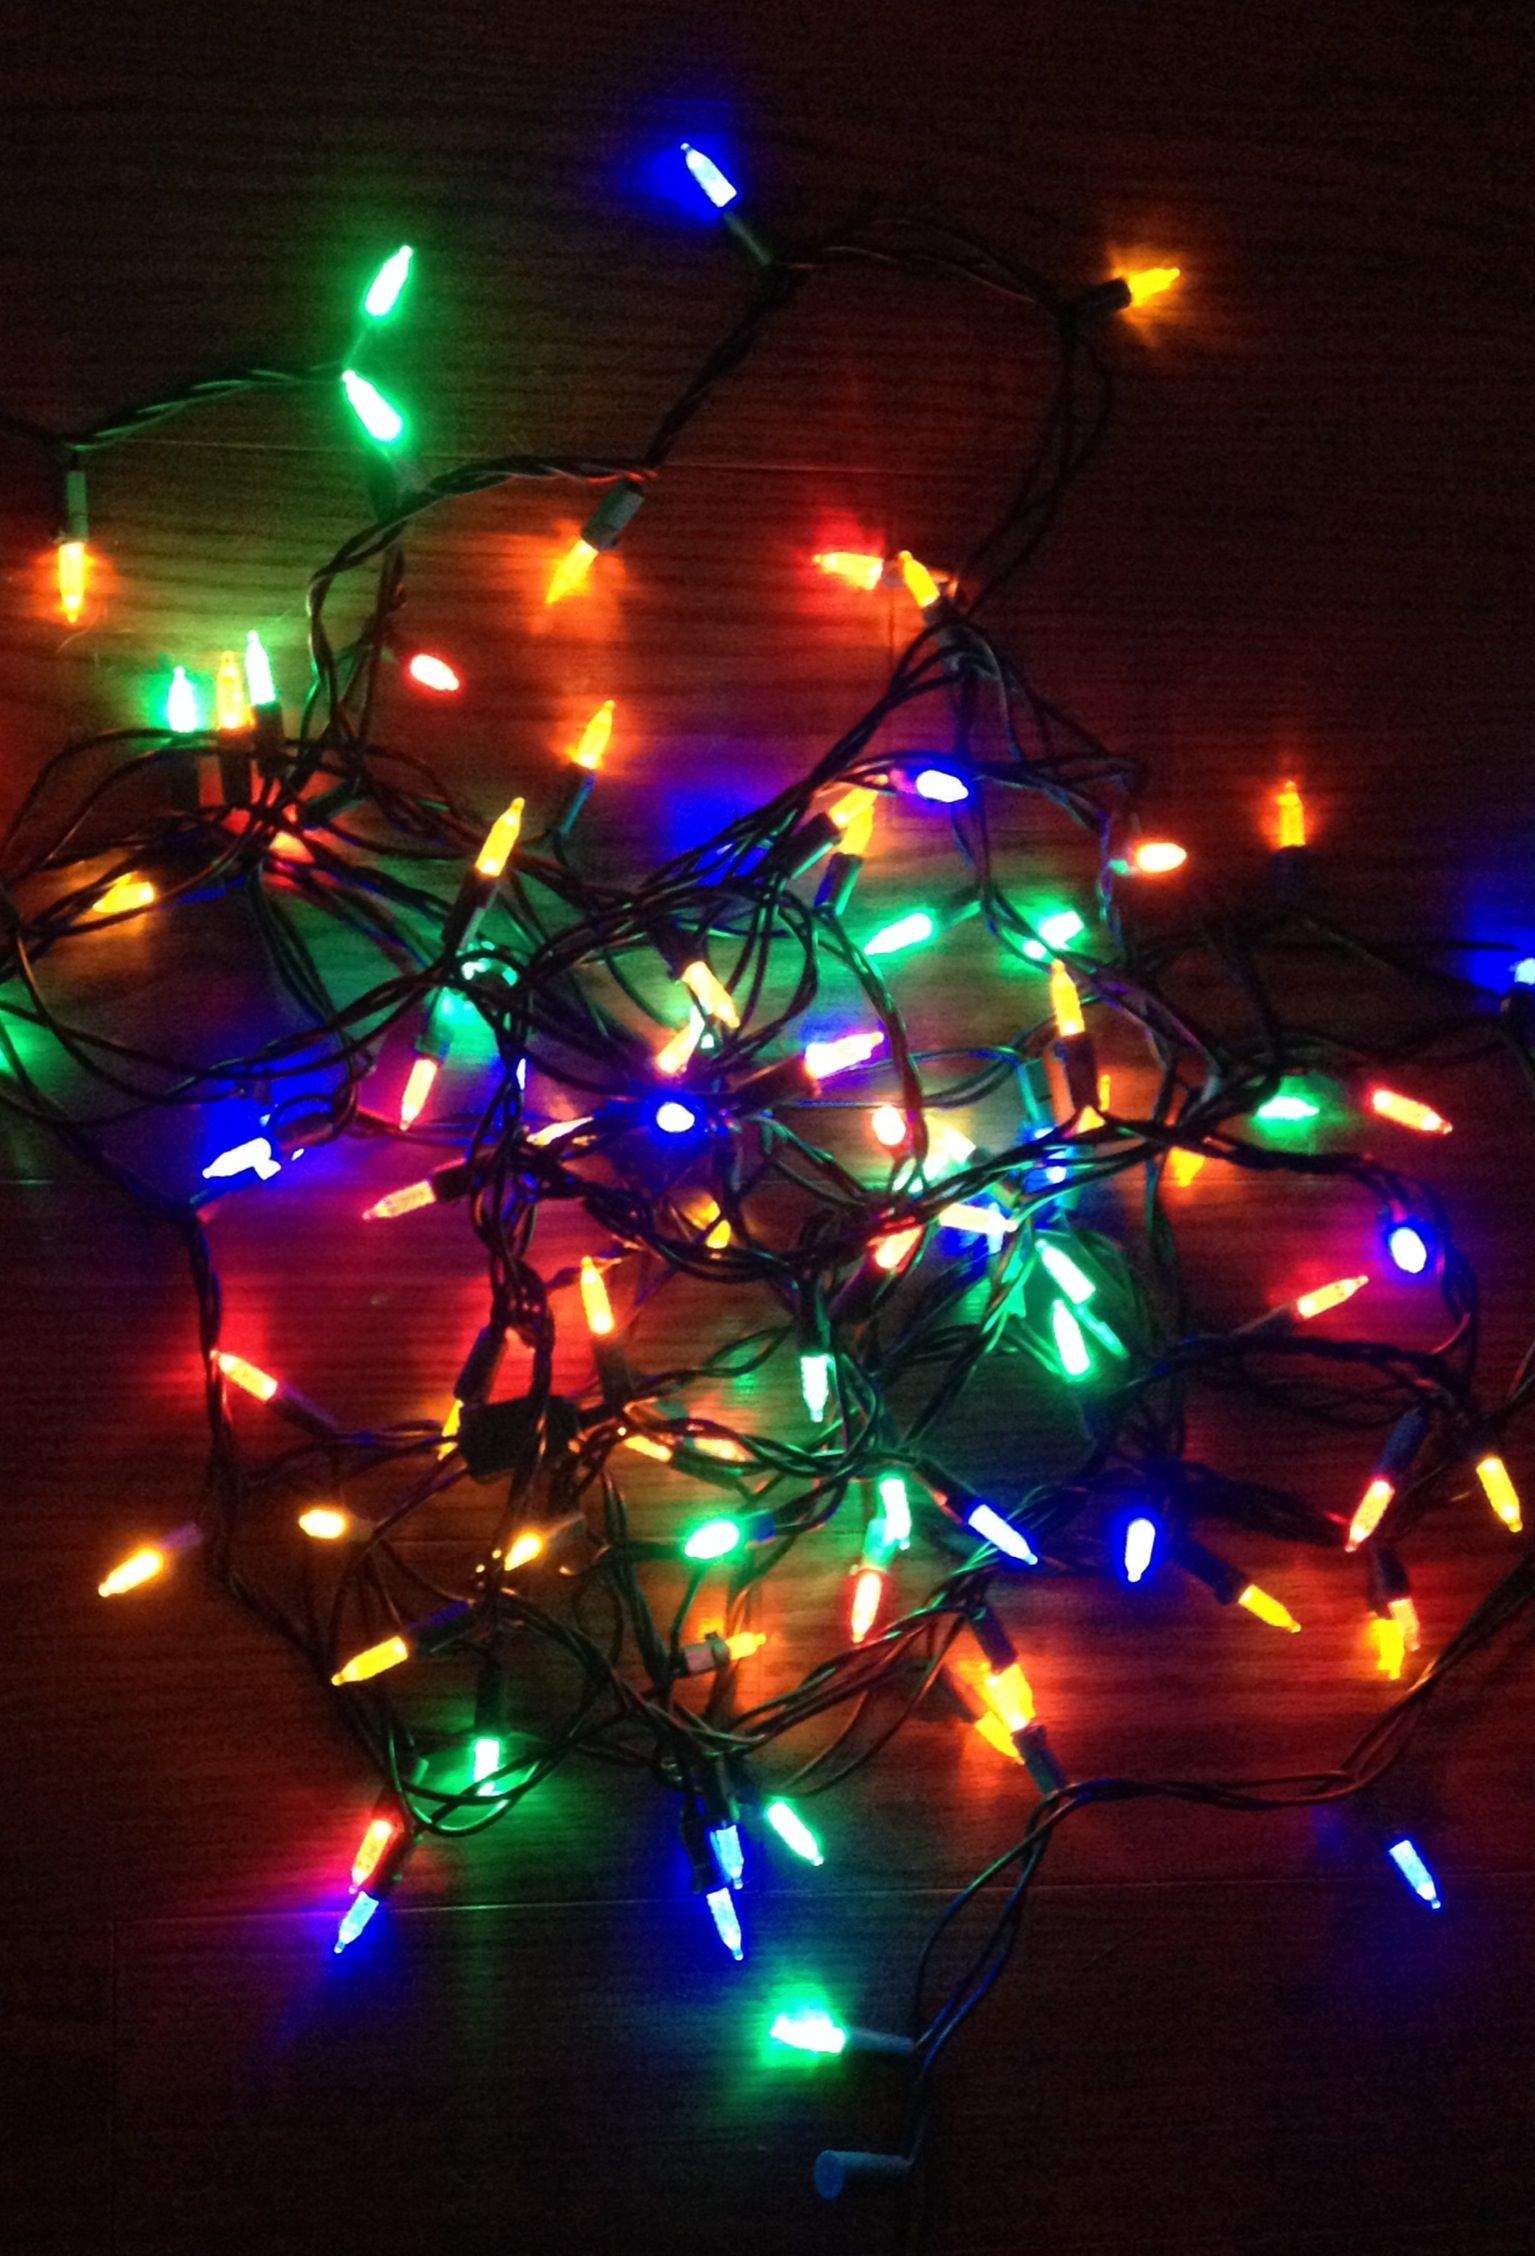 Packing up the Christmas lights. By KimStewart. Christmas wallpaper, Christmas lights, Neon wallpaper